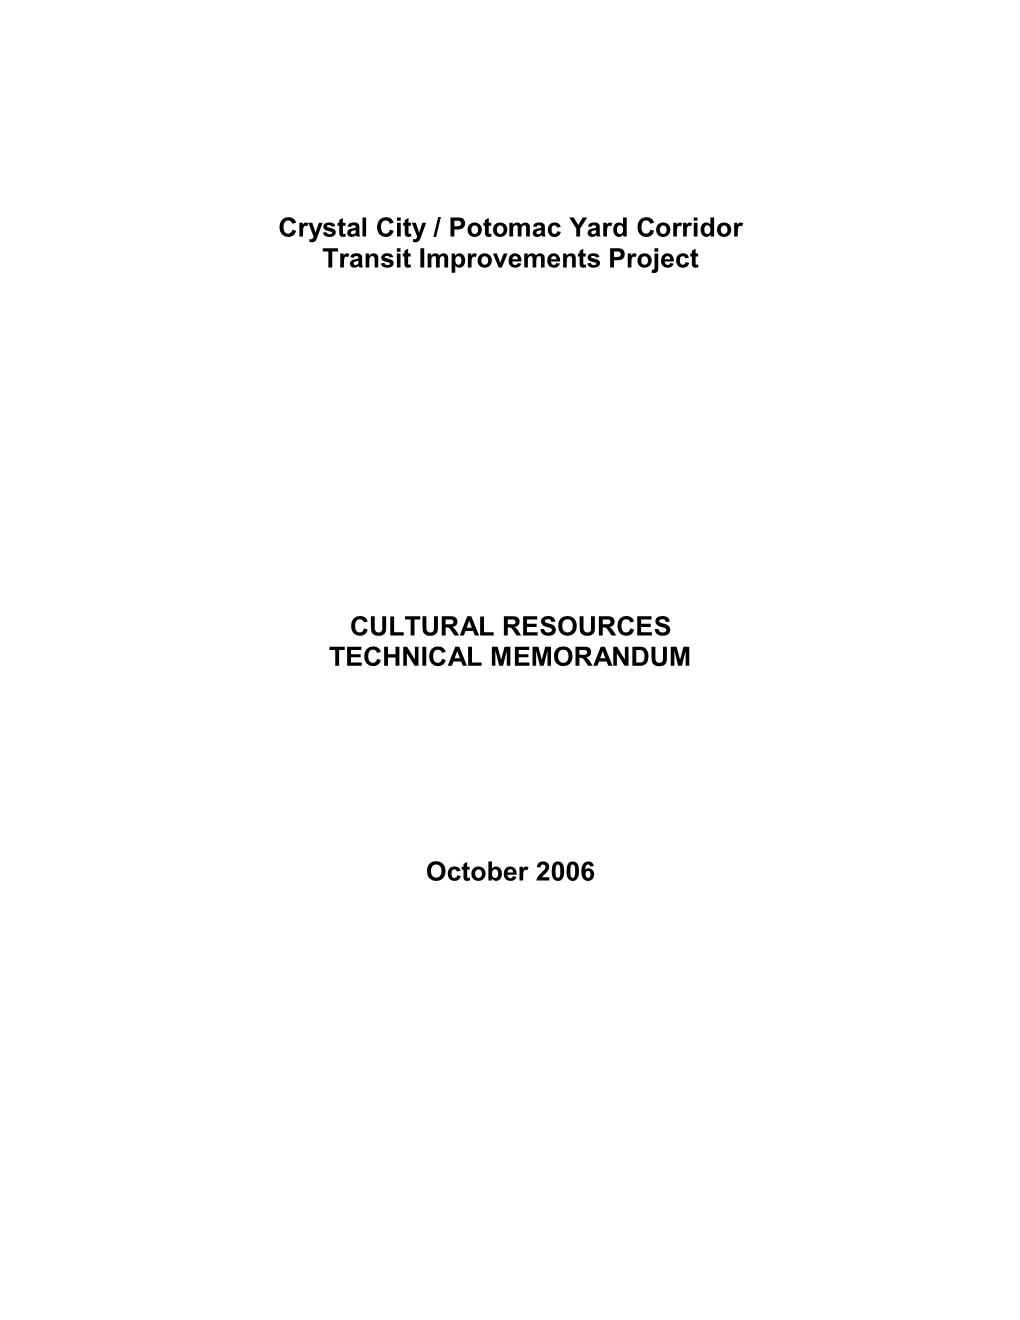 CCPY Cultural Resources Technical Memo